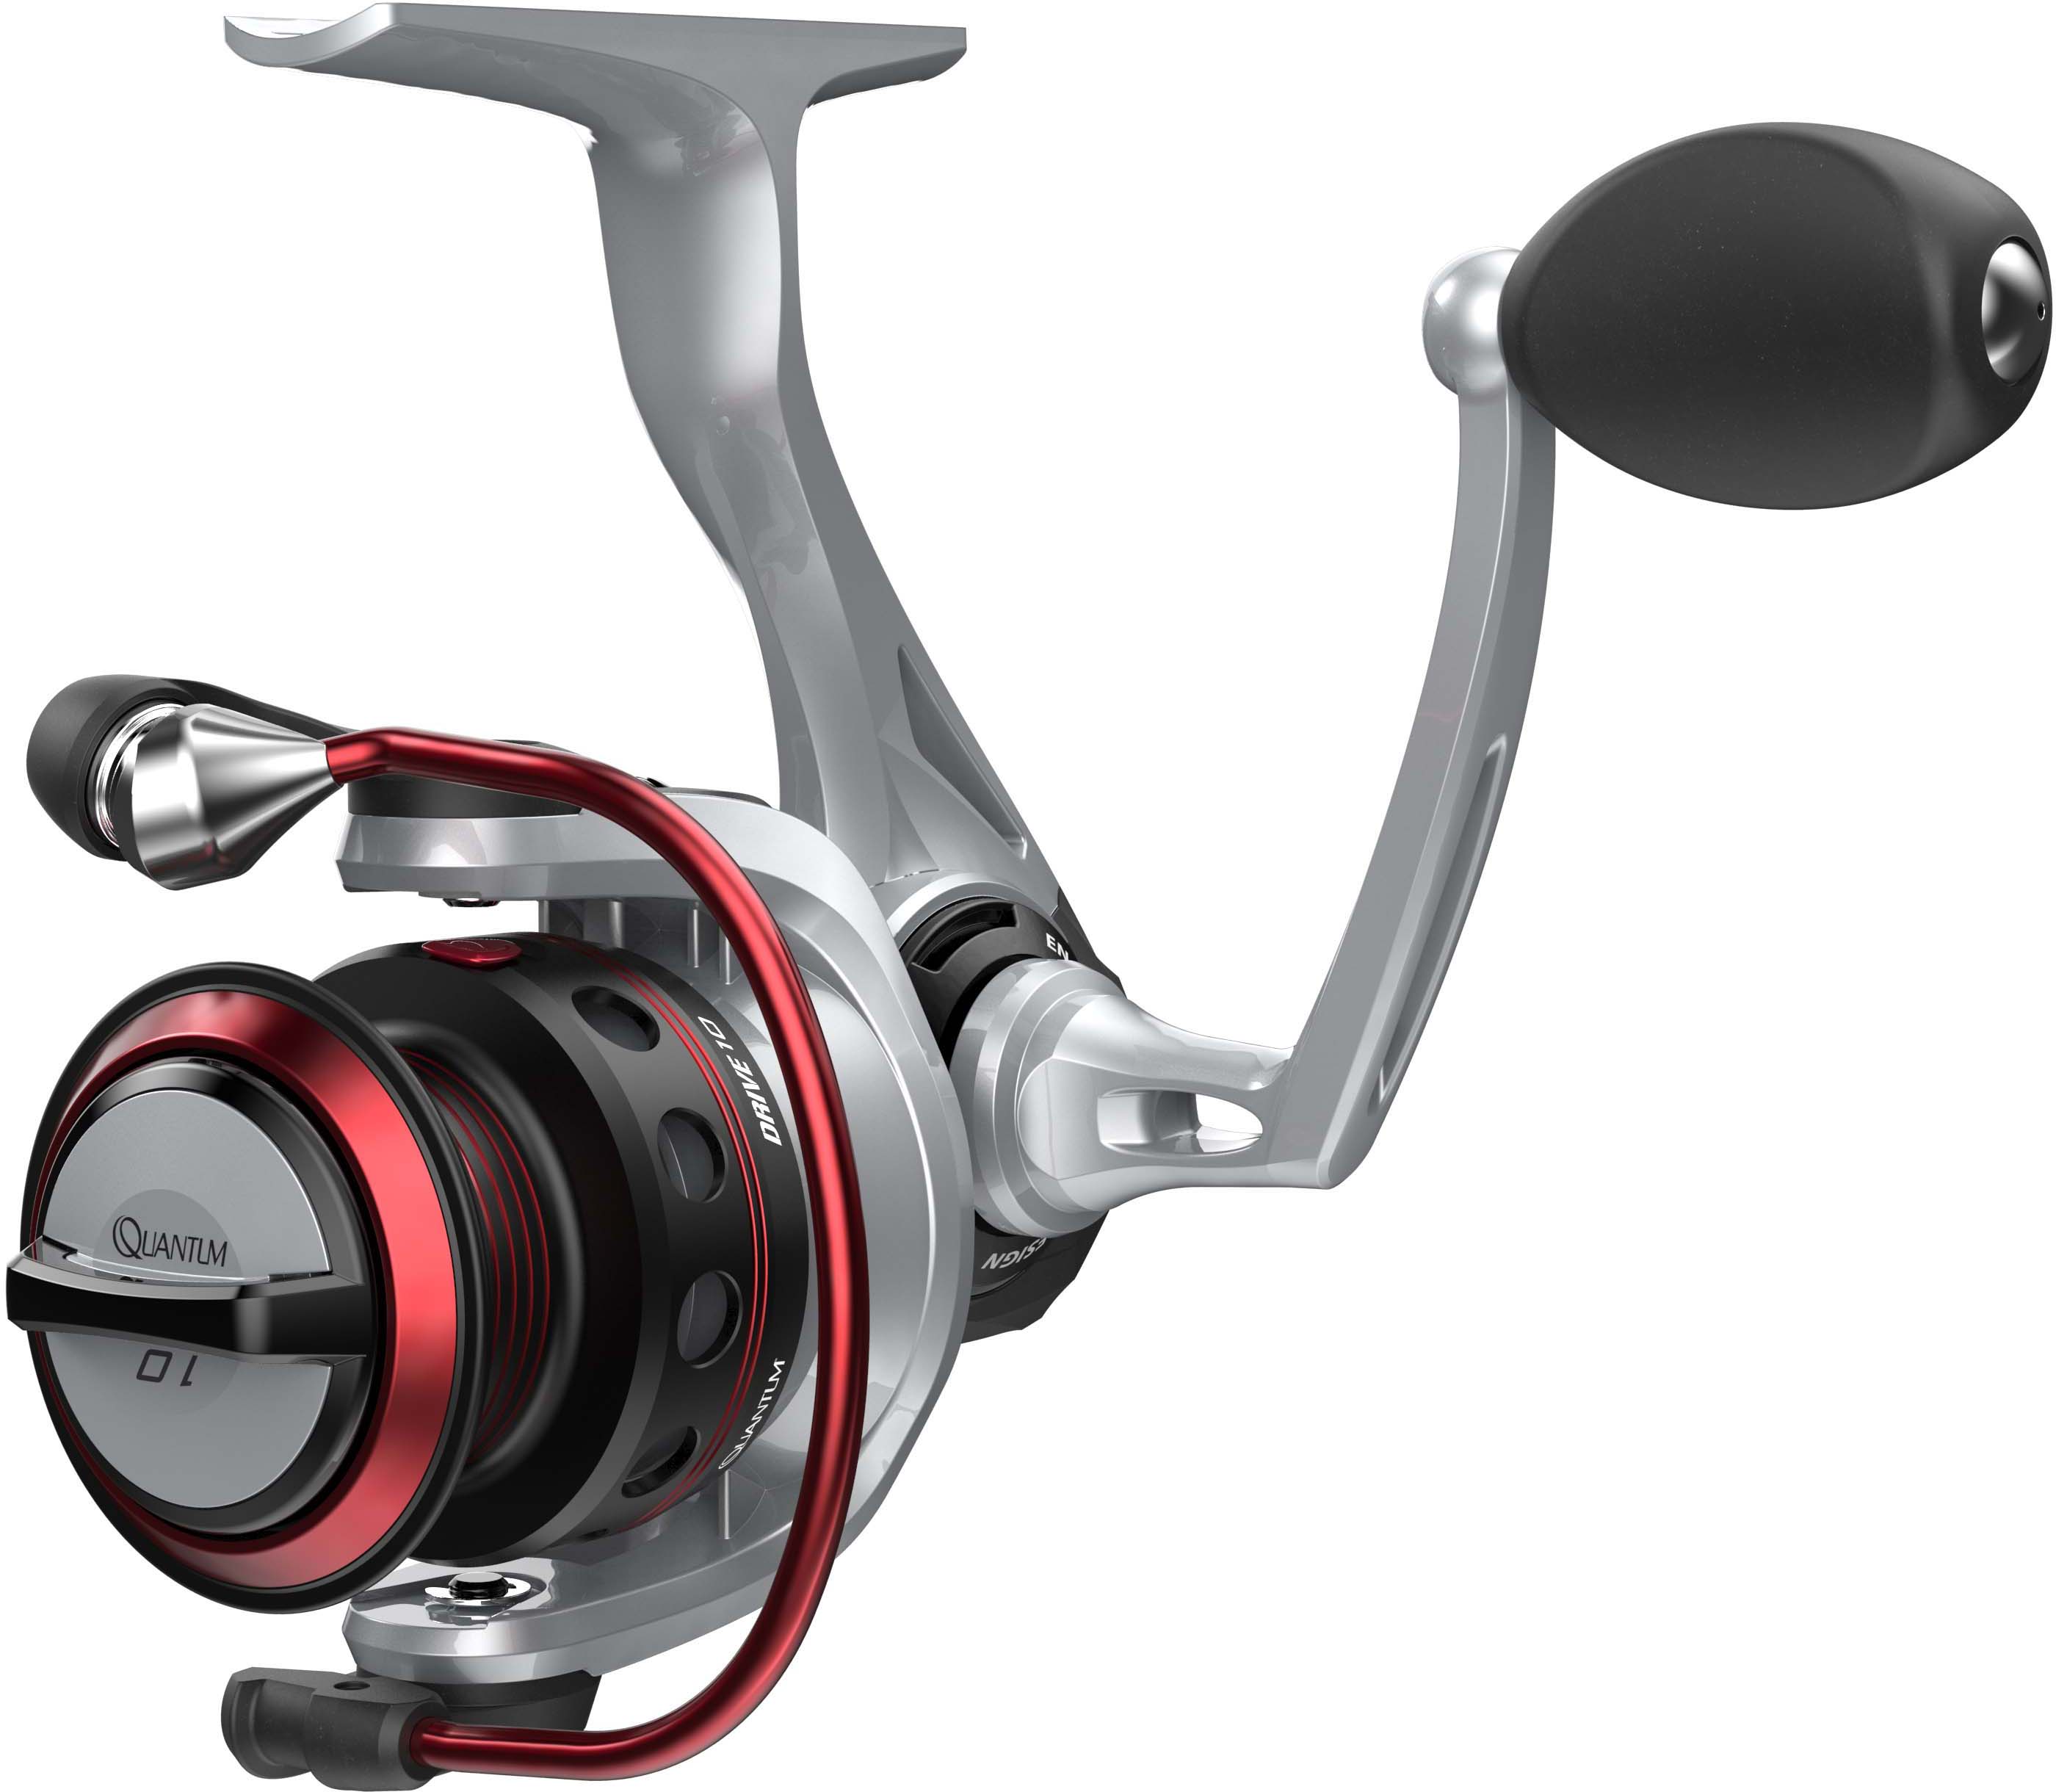 https://op1.0ps.us/original/opplanet-quantum-drive-spinning-reel-cp-9-bearings-125yd-4lb-size-10-dr10-cp3-main